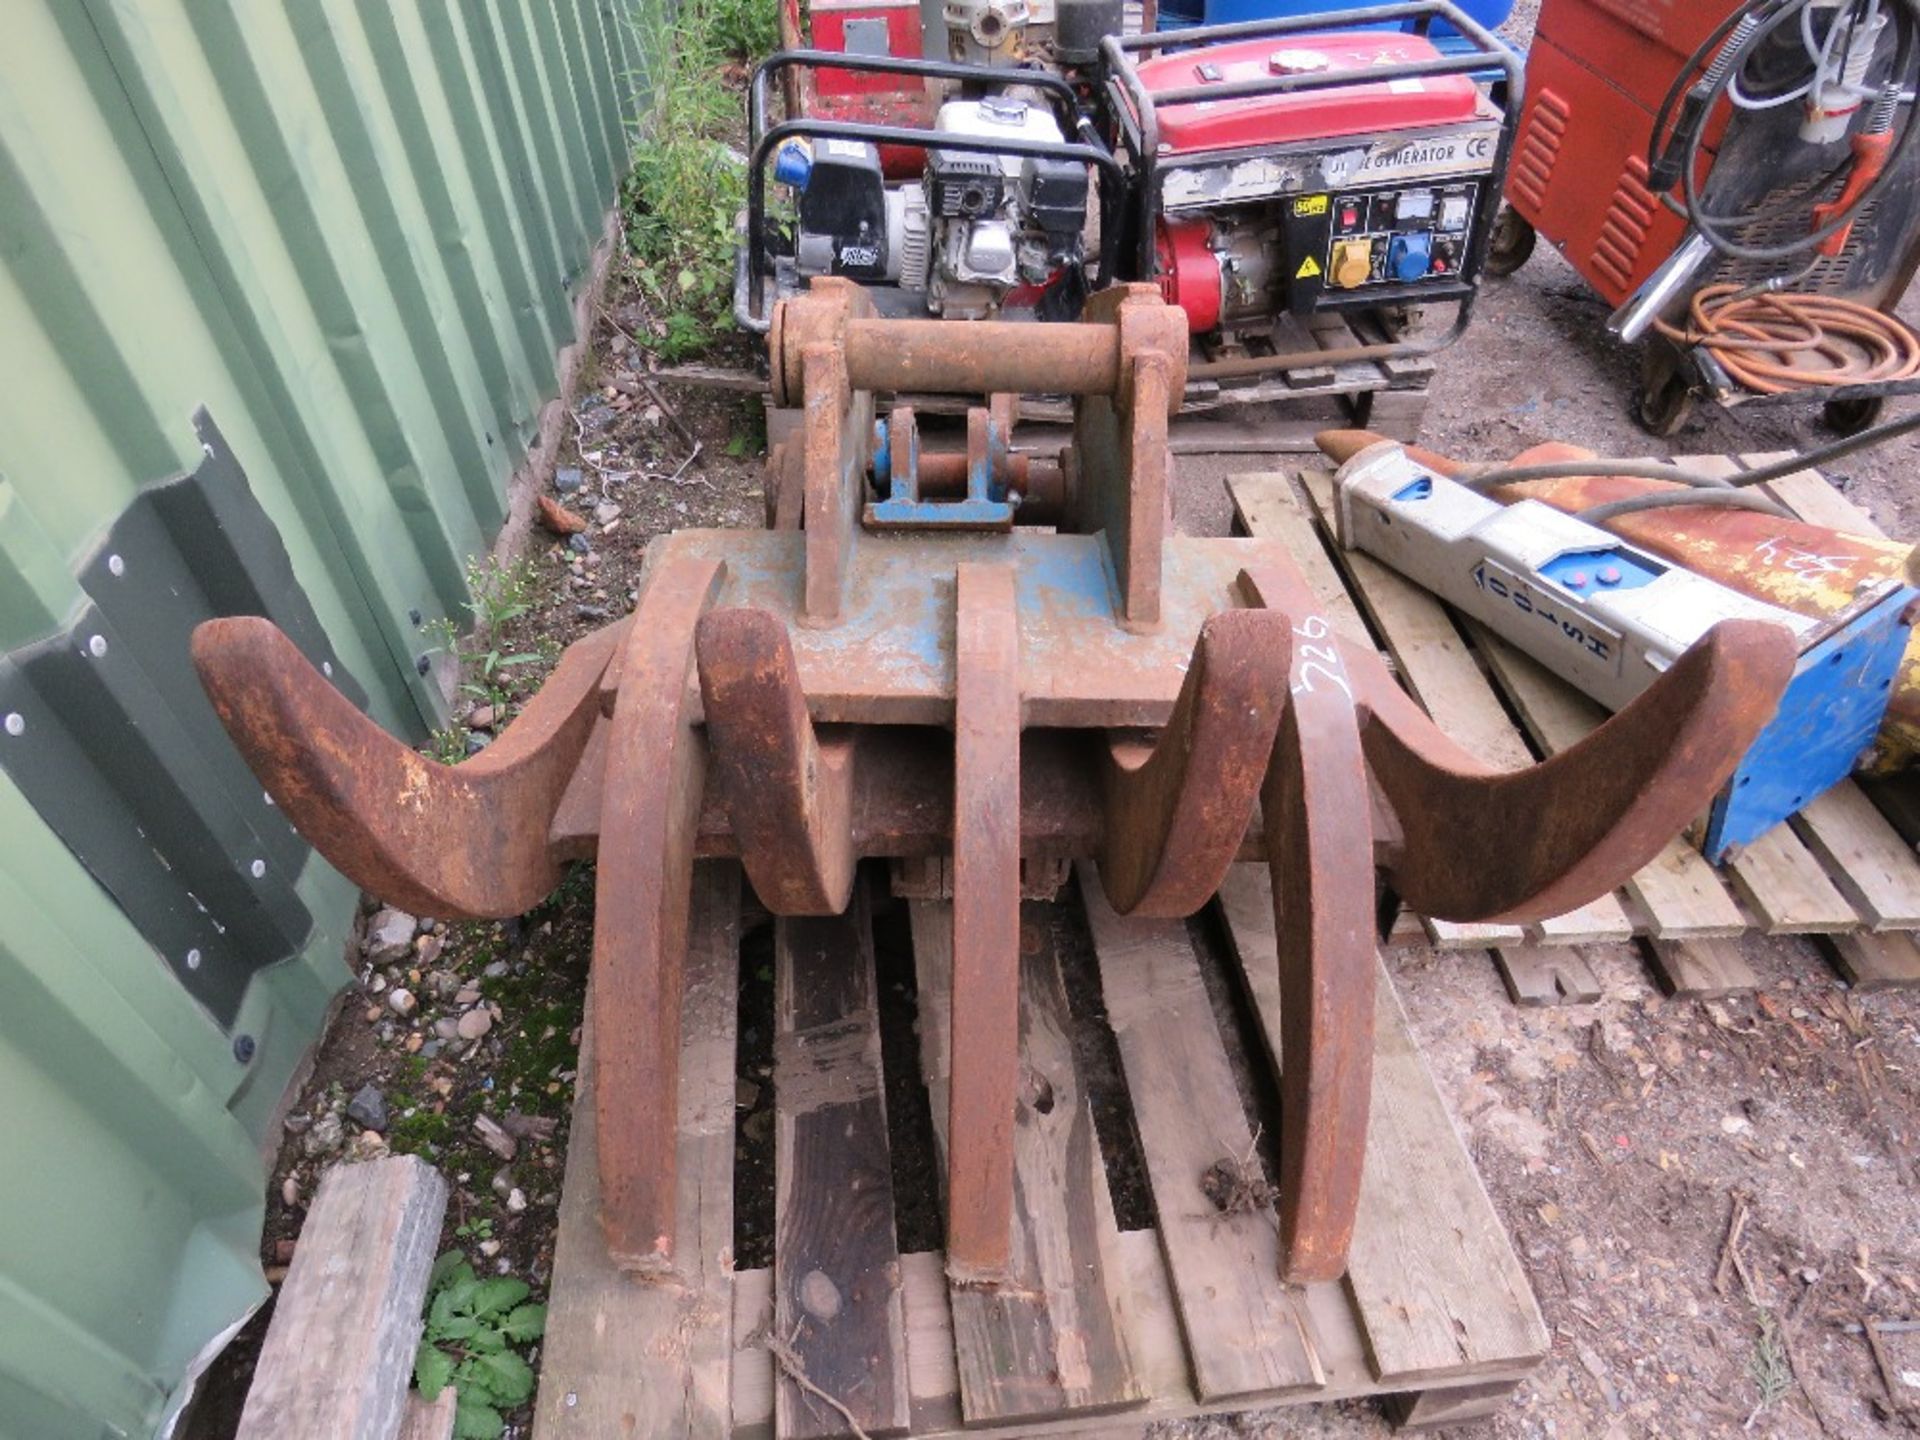 6 FINGER MECHANICAL GRAPPLE ON 65MM PINS FOR 13TONNE EXCAVATOR, WITH LINK BAR AND BRACKET. - Image 2 of 3